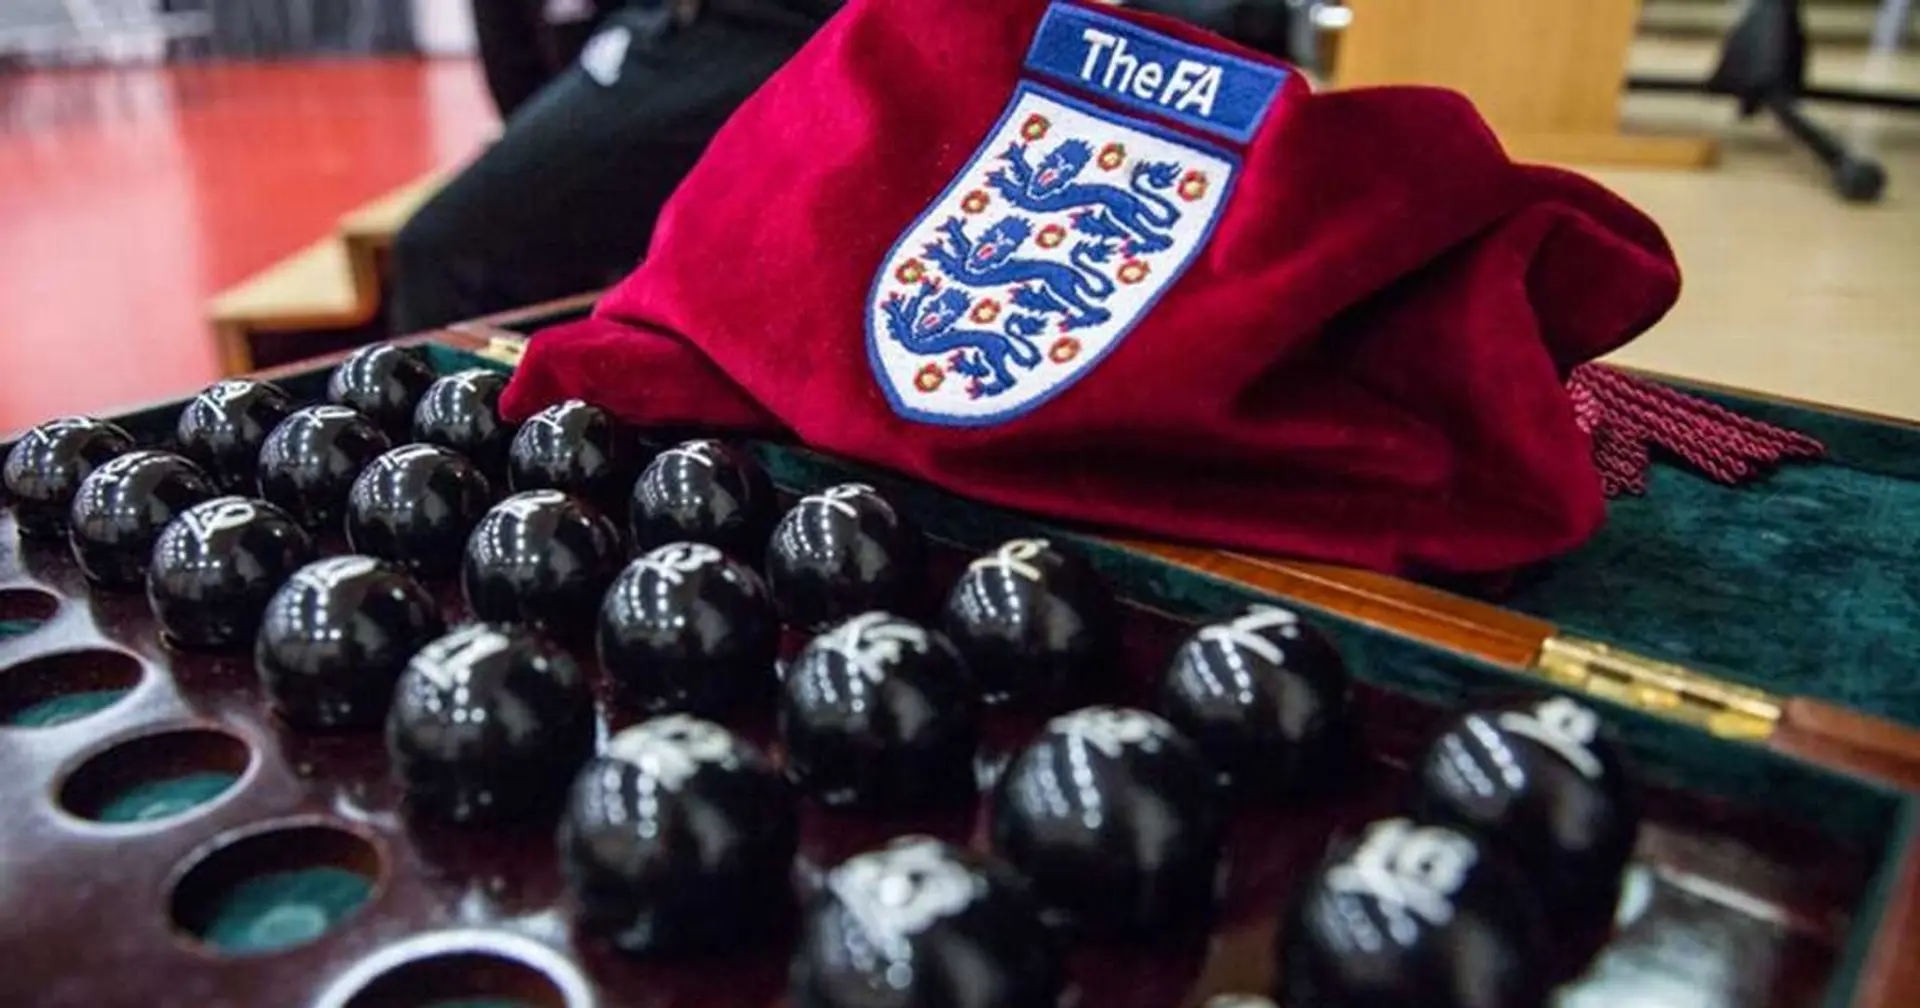 Arsenal to play Oxford: FA Cup third round draw in full